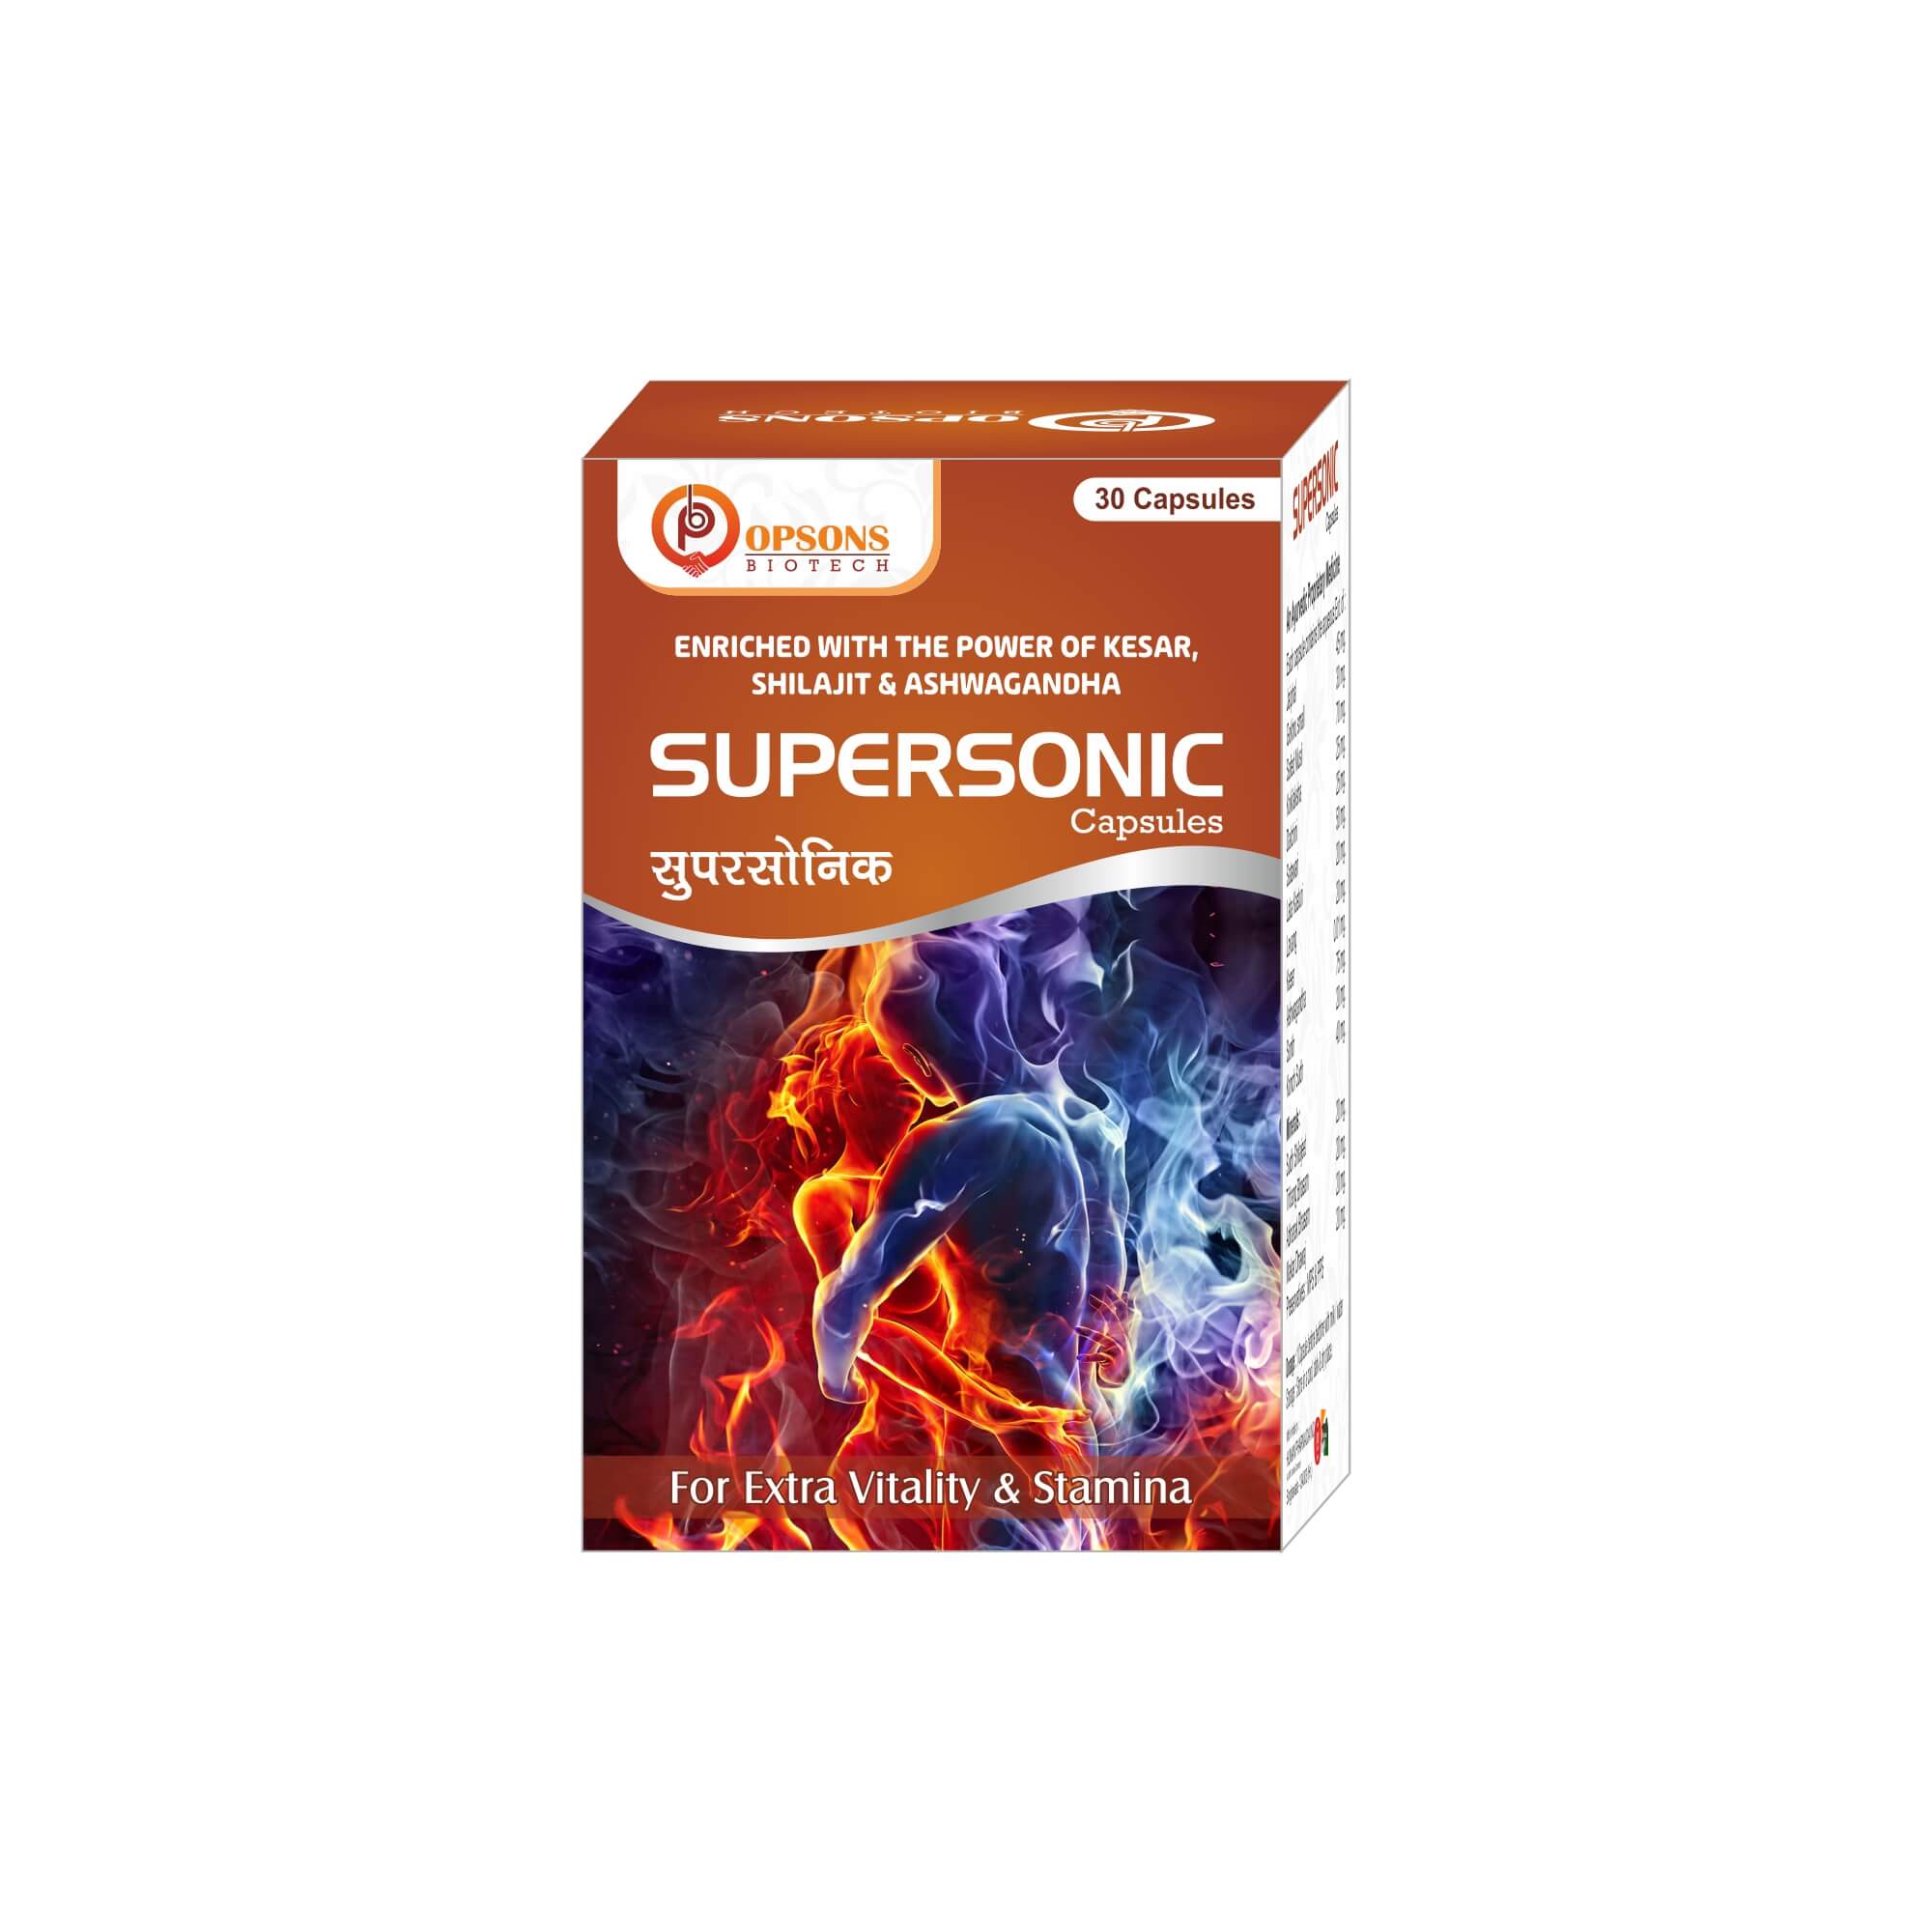 Product Name: Supersonic Capsules, Compositions of Enriched With The Powder Of Kesar, Shilajit  & Ashwagandha are Enriched With The Powder Of Kesar, Shilajit  & Ashwagandha - Opsons Biotech